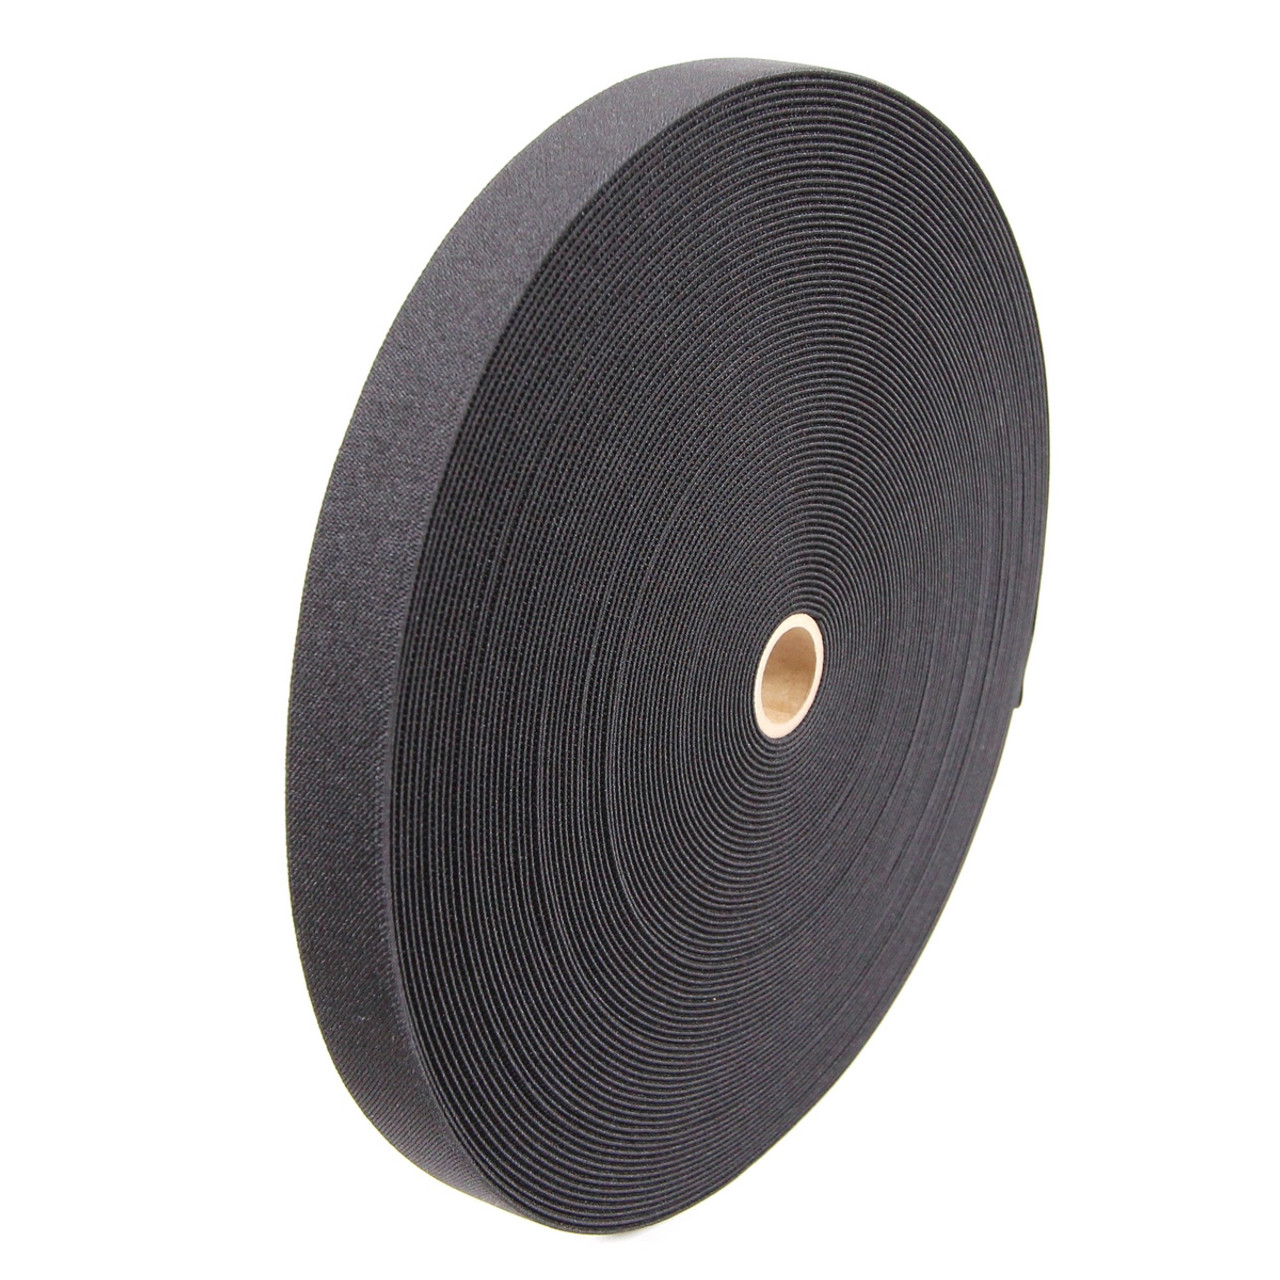 2 inch (50mm) tubular nylon webbing, Berry compliant, IRR compliant,  solution dyed black whiskey two four